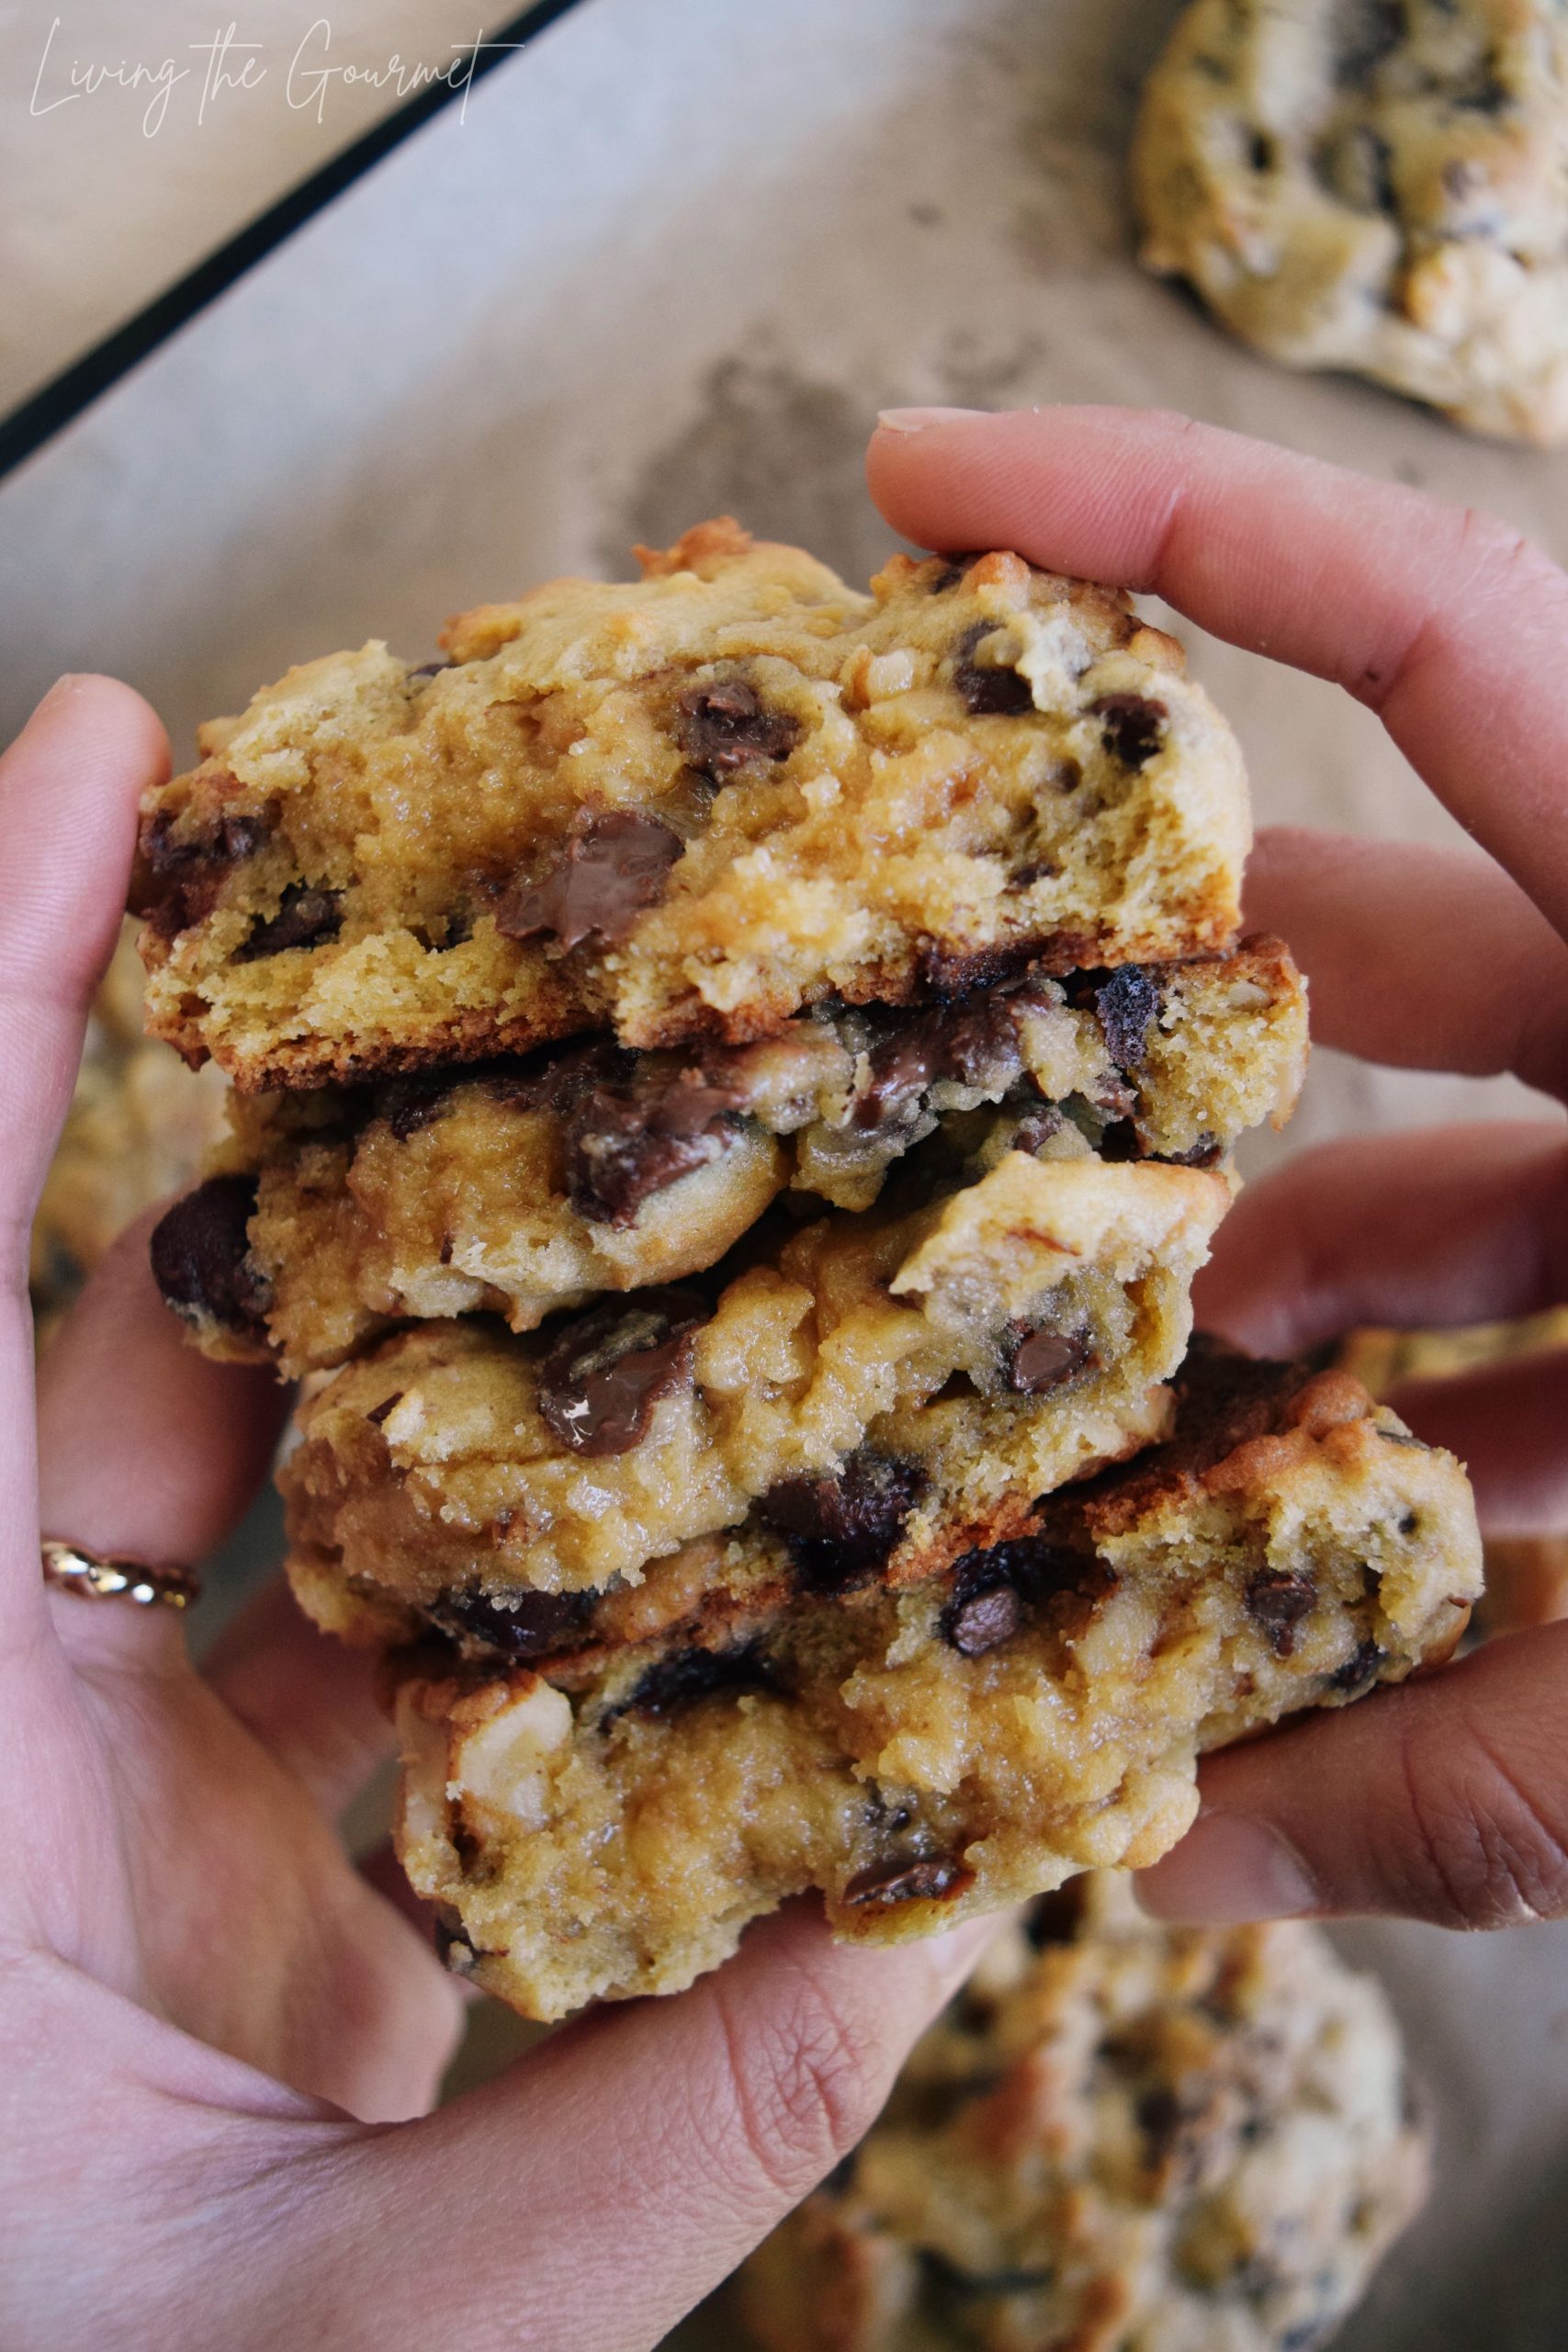 Levain Bakery-Style Giant Chocolate Chip Walnut Cookies